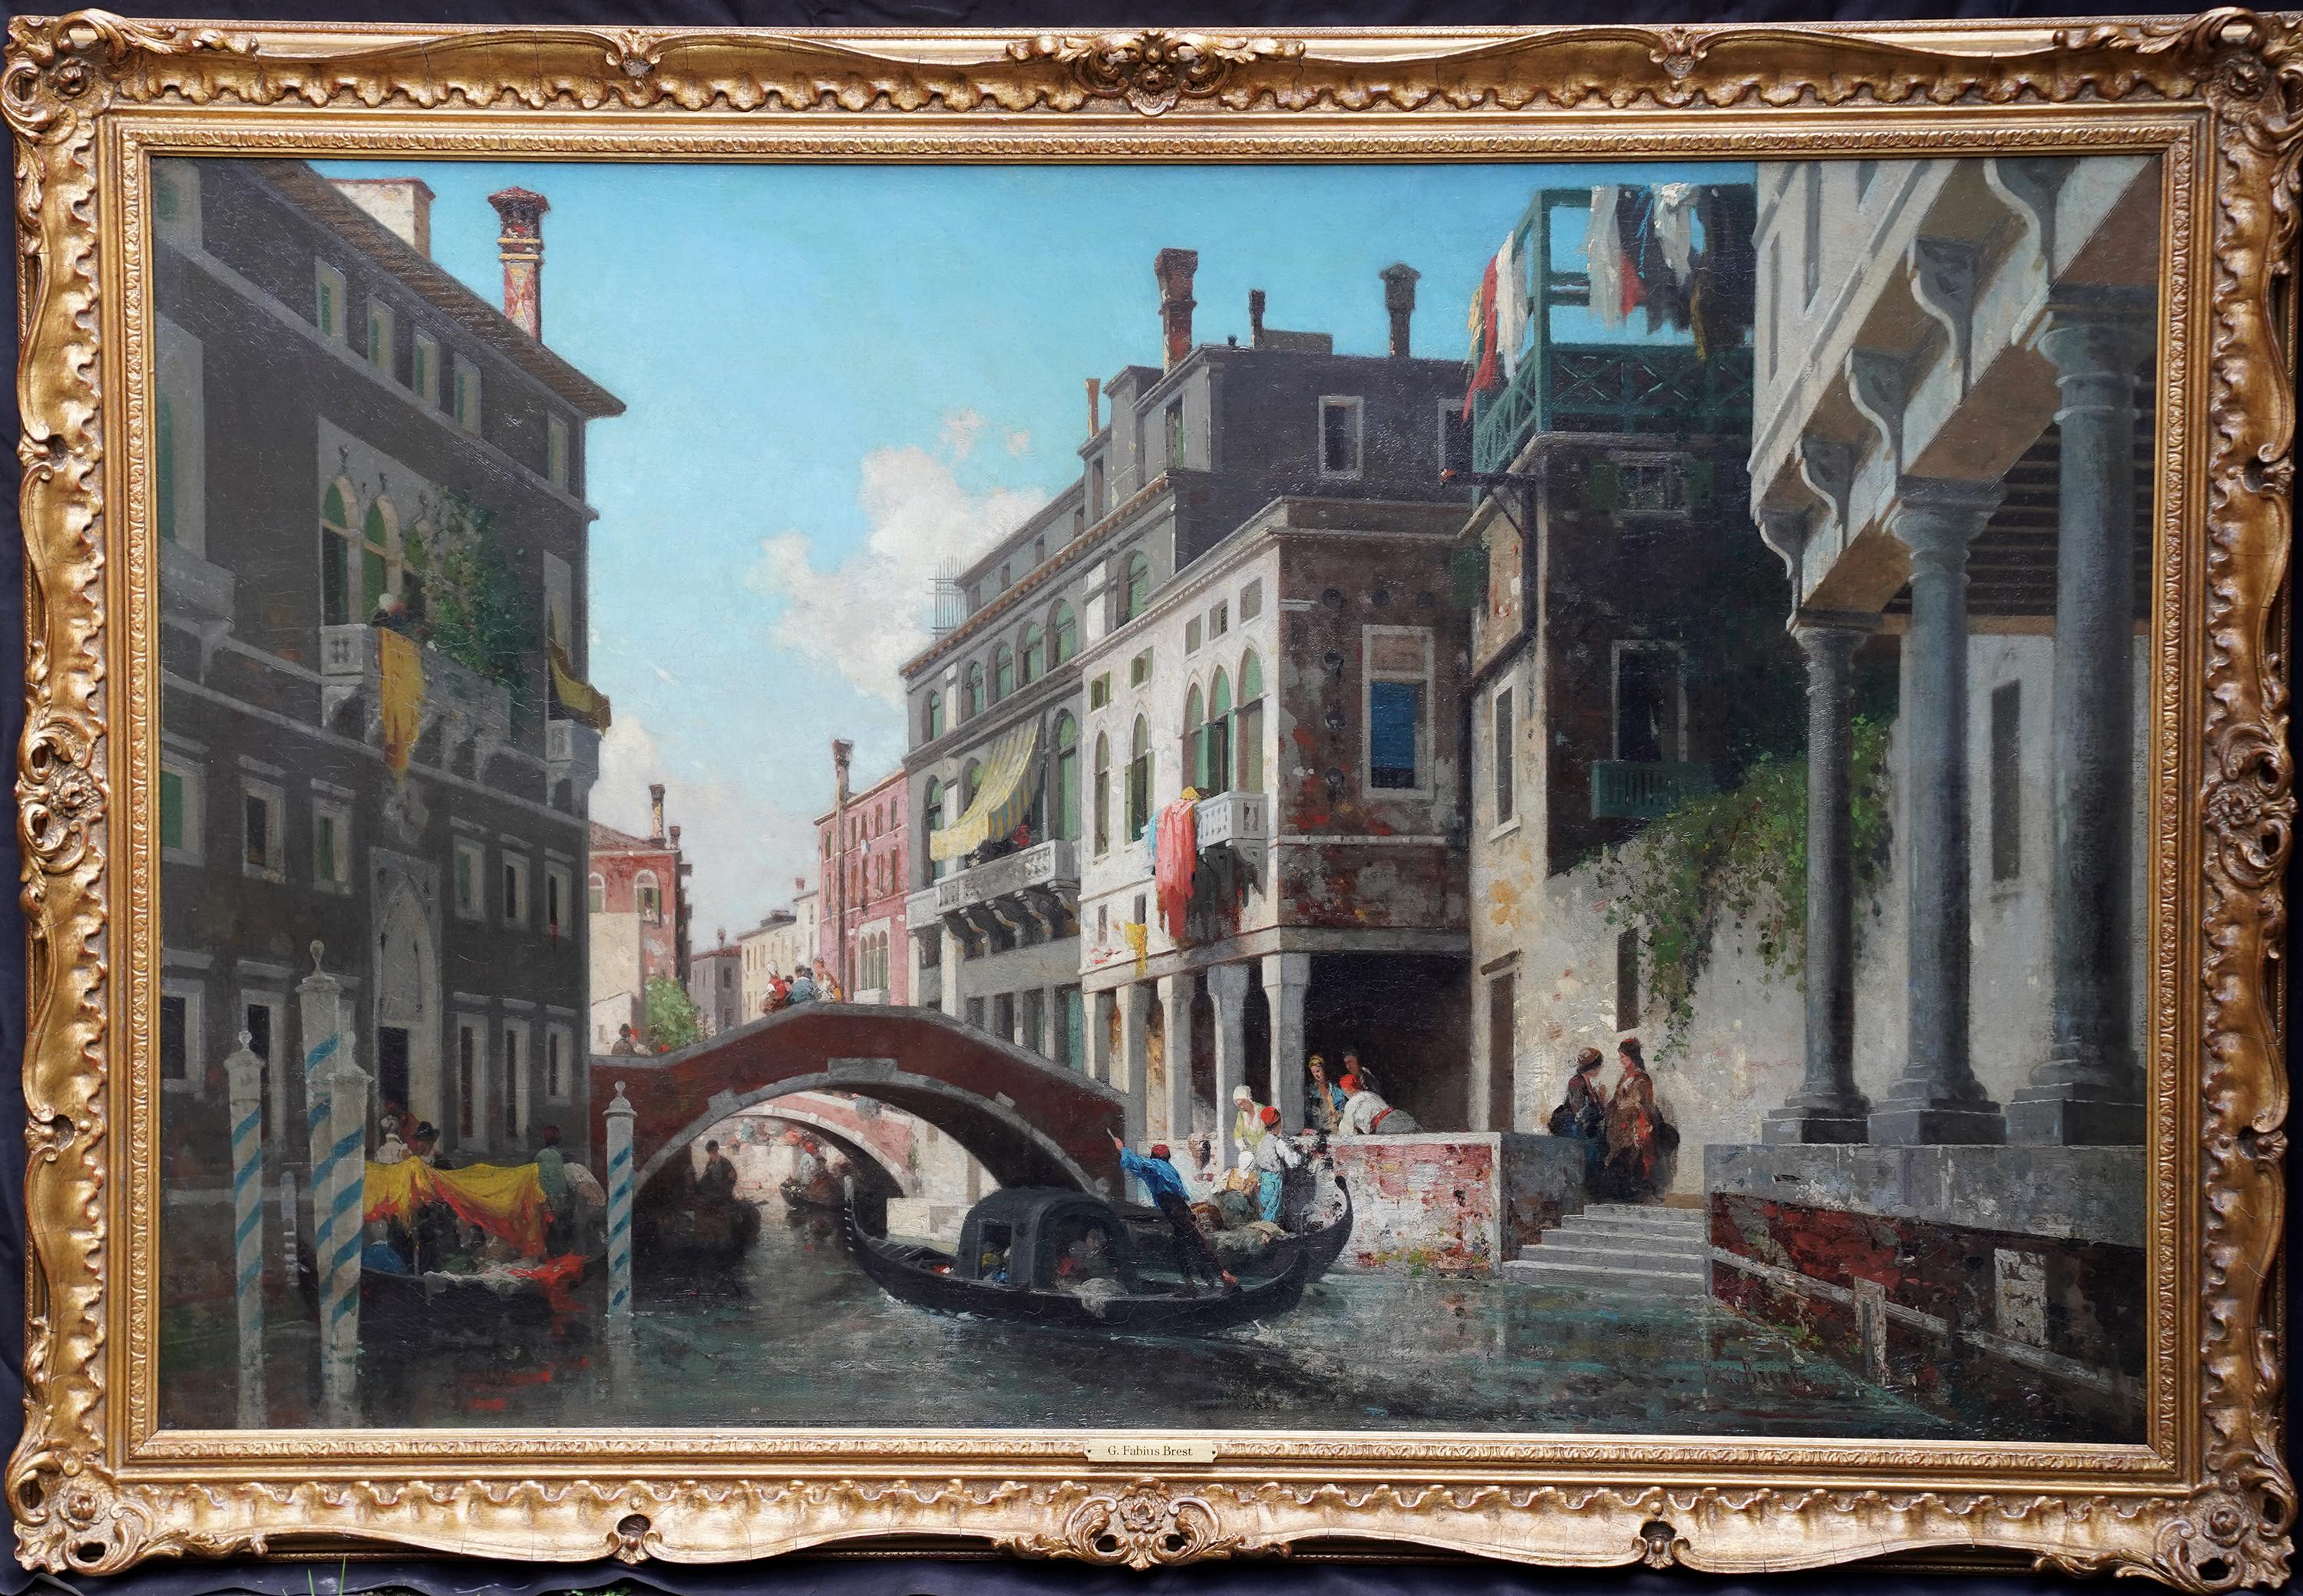 Germain Fabius Brest Landscape Painting - Gondolas on a Venetian Canal - French Victorian art oil painting Venice Italy